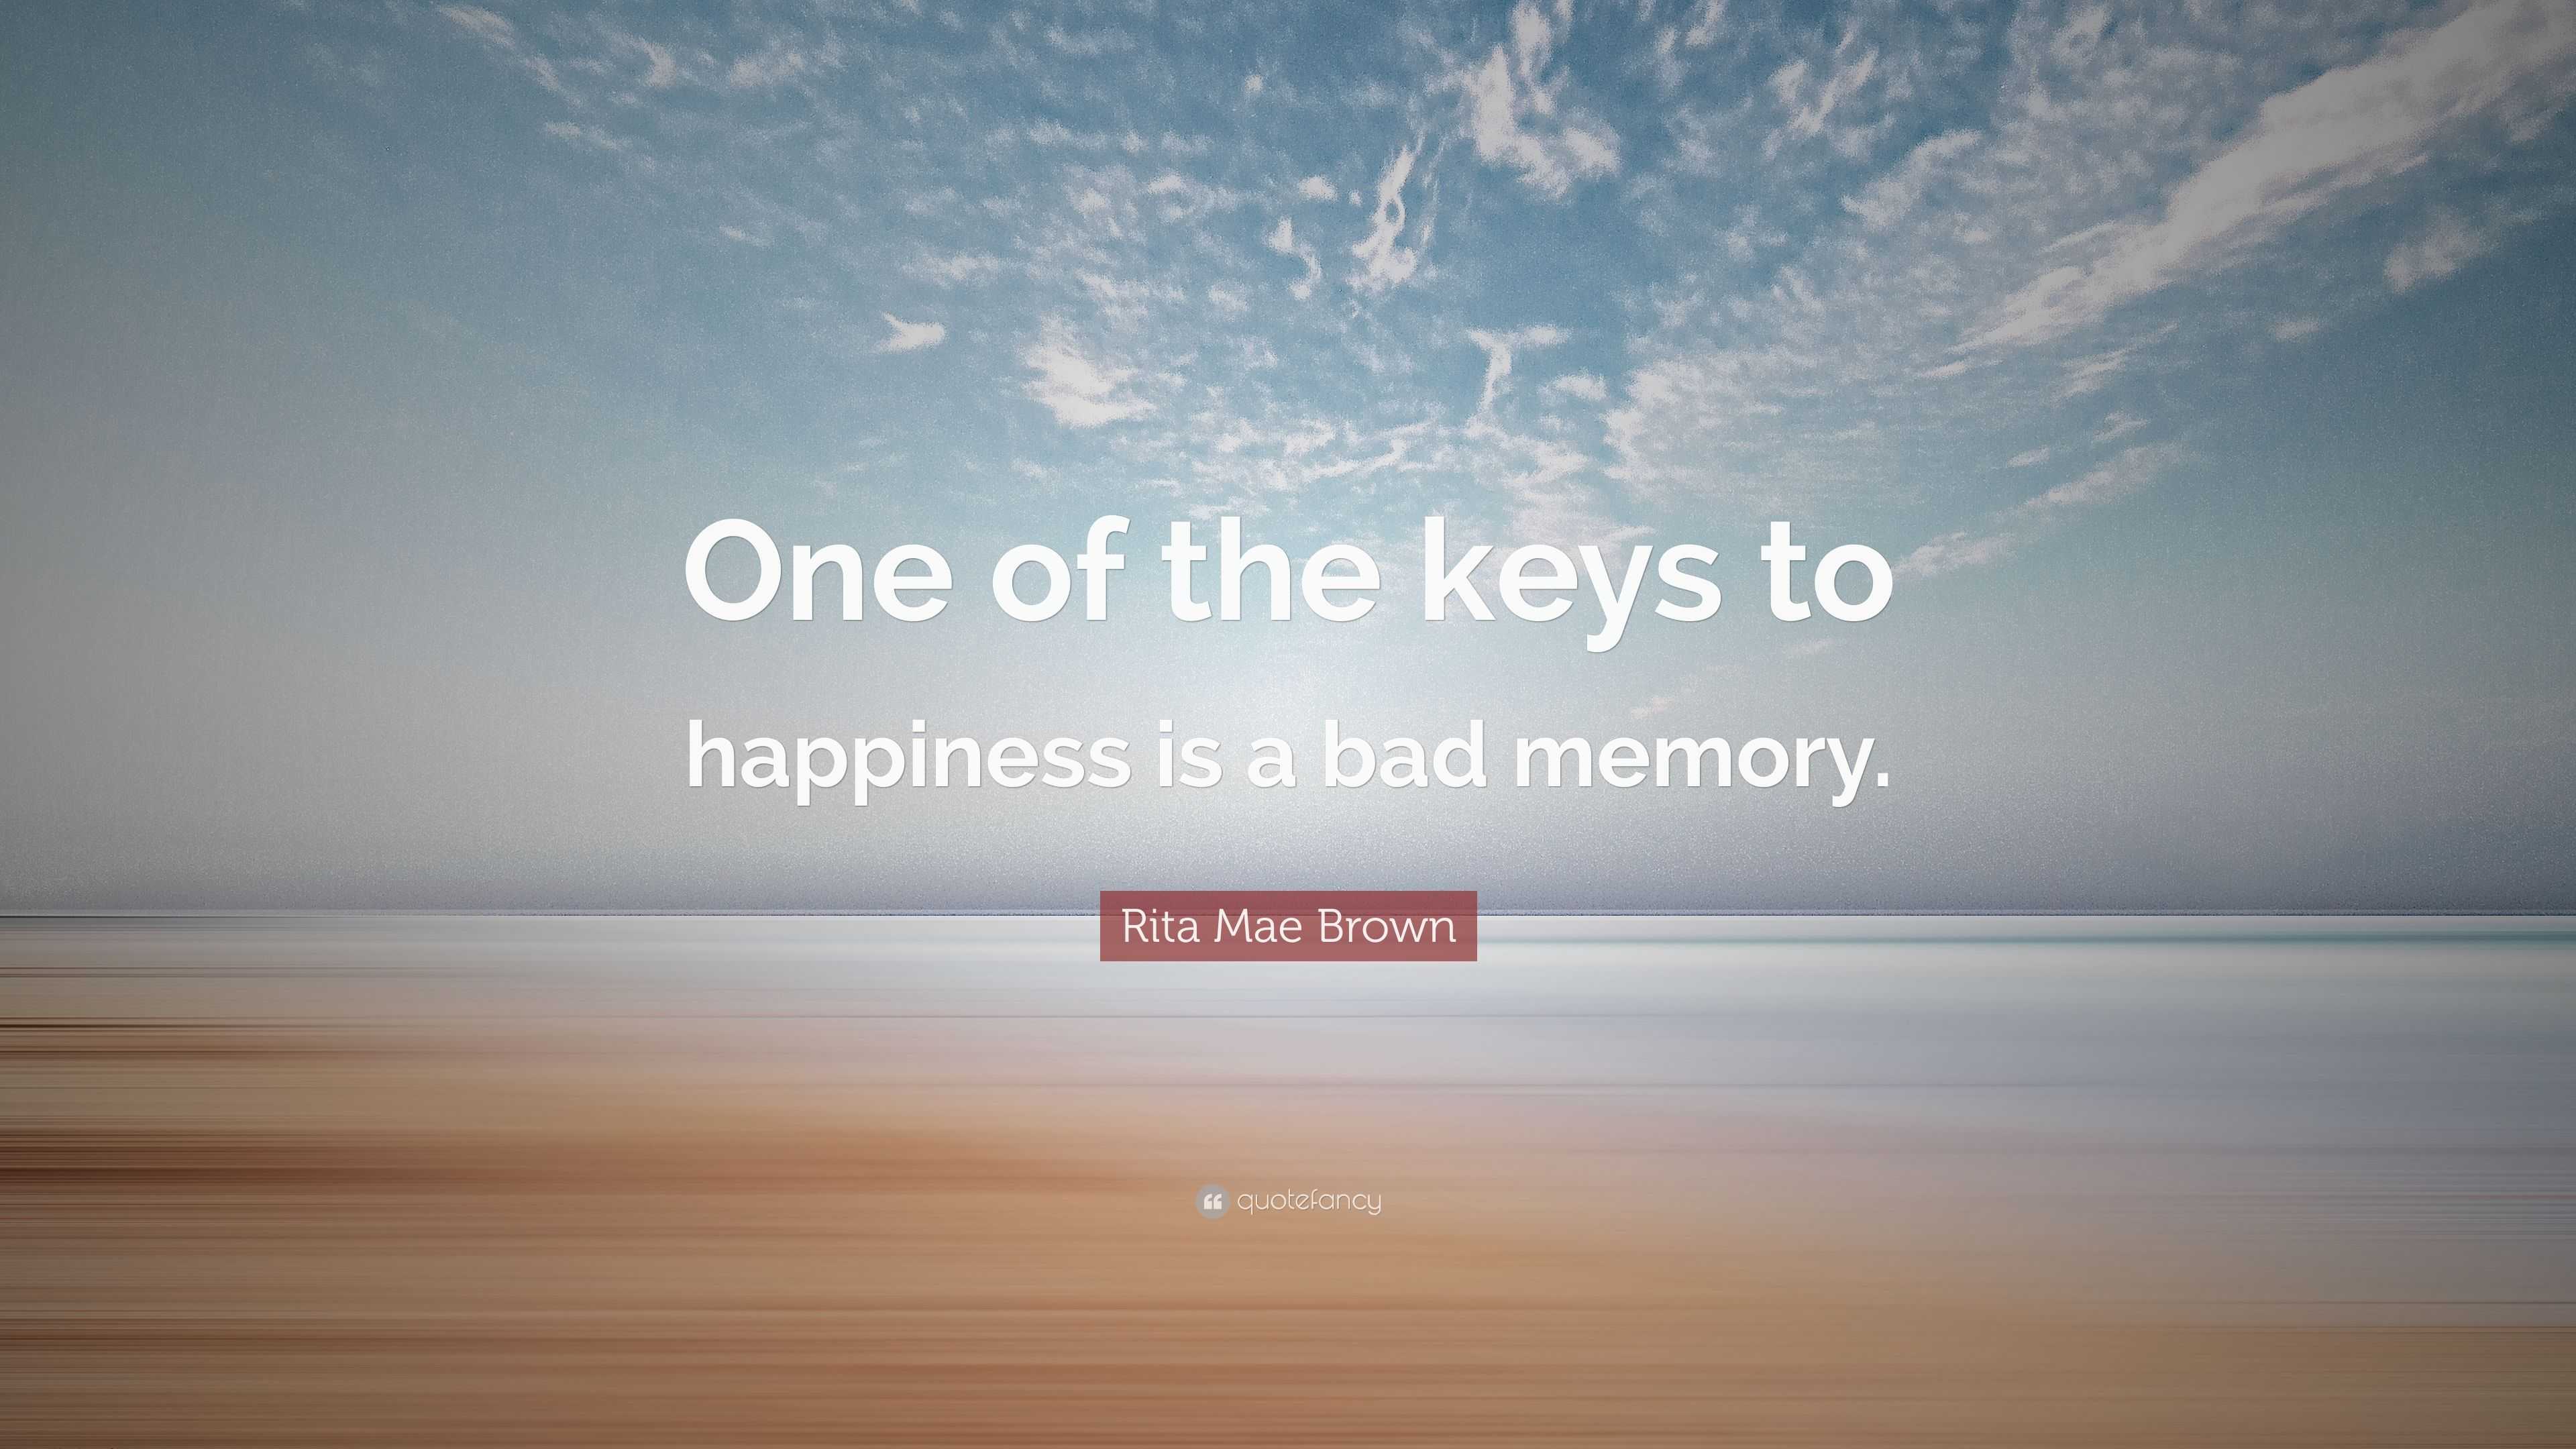 Rita Mae Brown Quote: “One of the keys to happiness is a bad memory.”